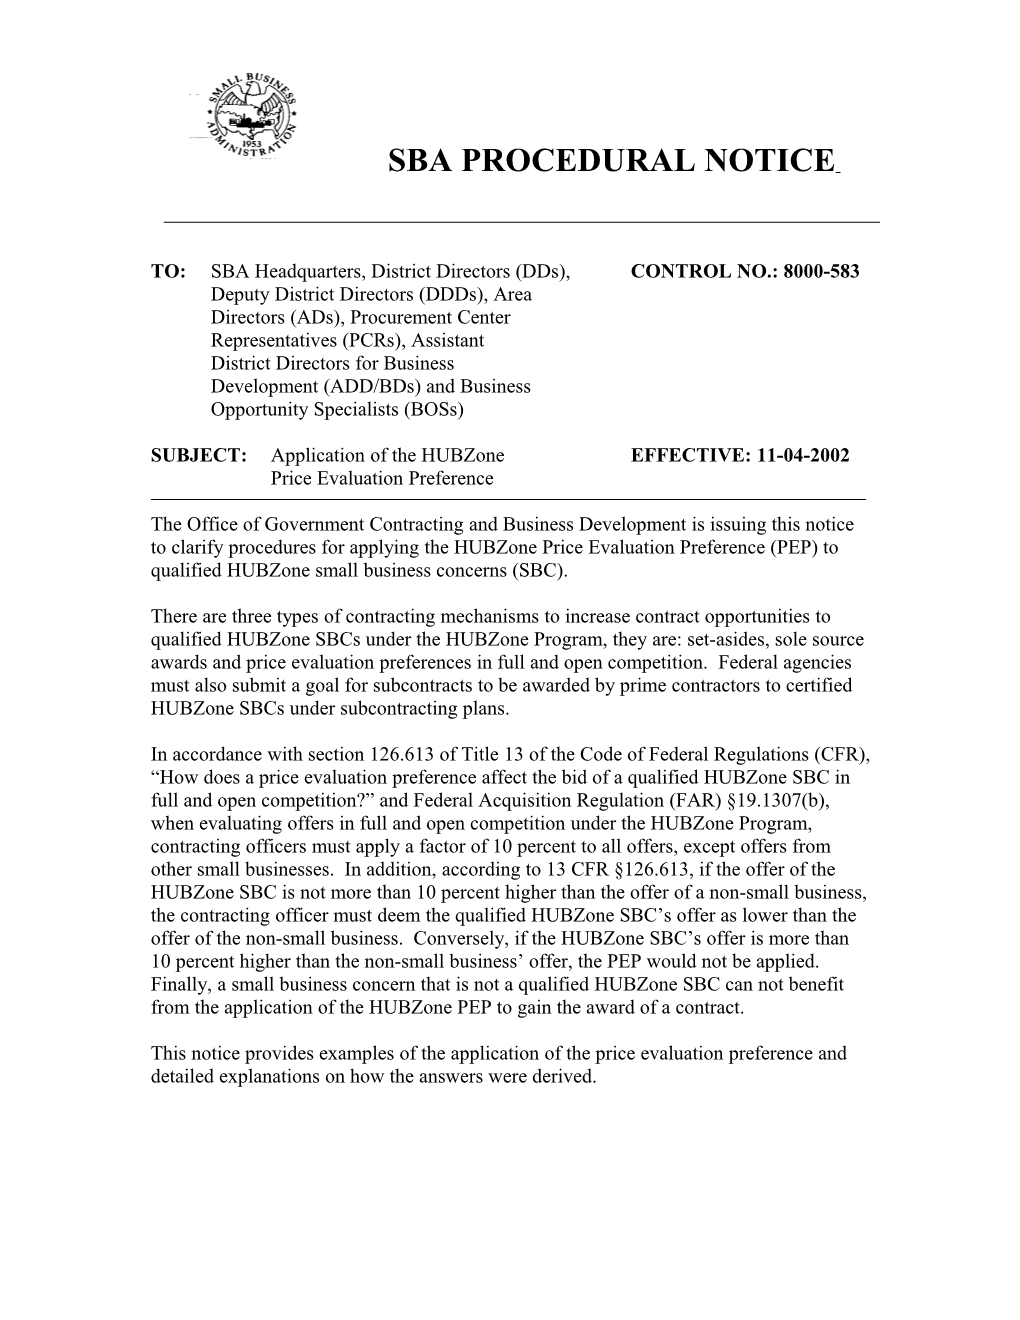 SBA Procedural Notice 8000-555: Application of the Hubzone Price Evaluation Preference